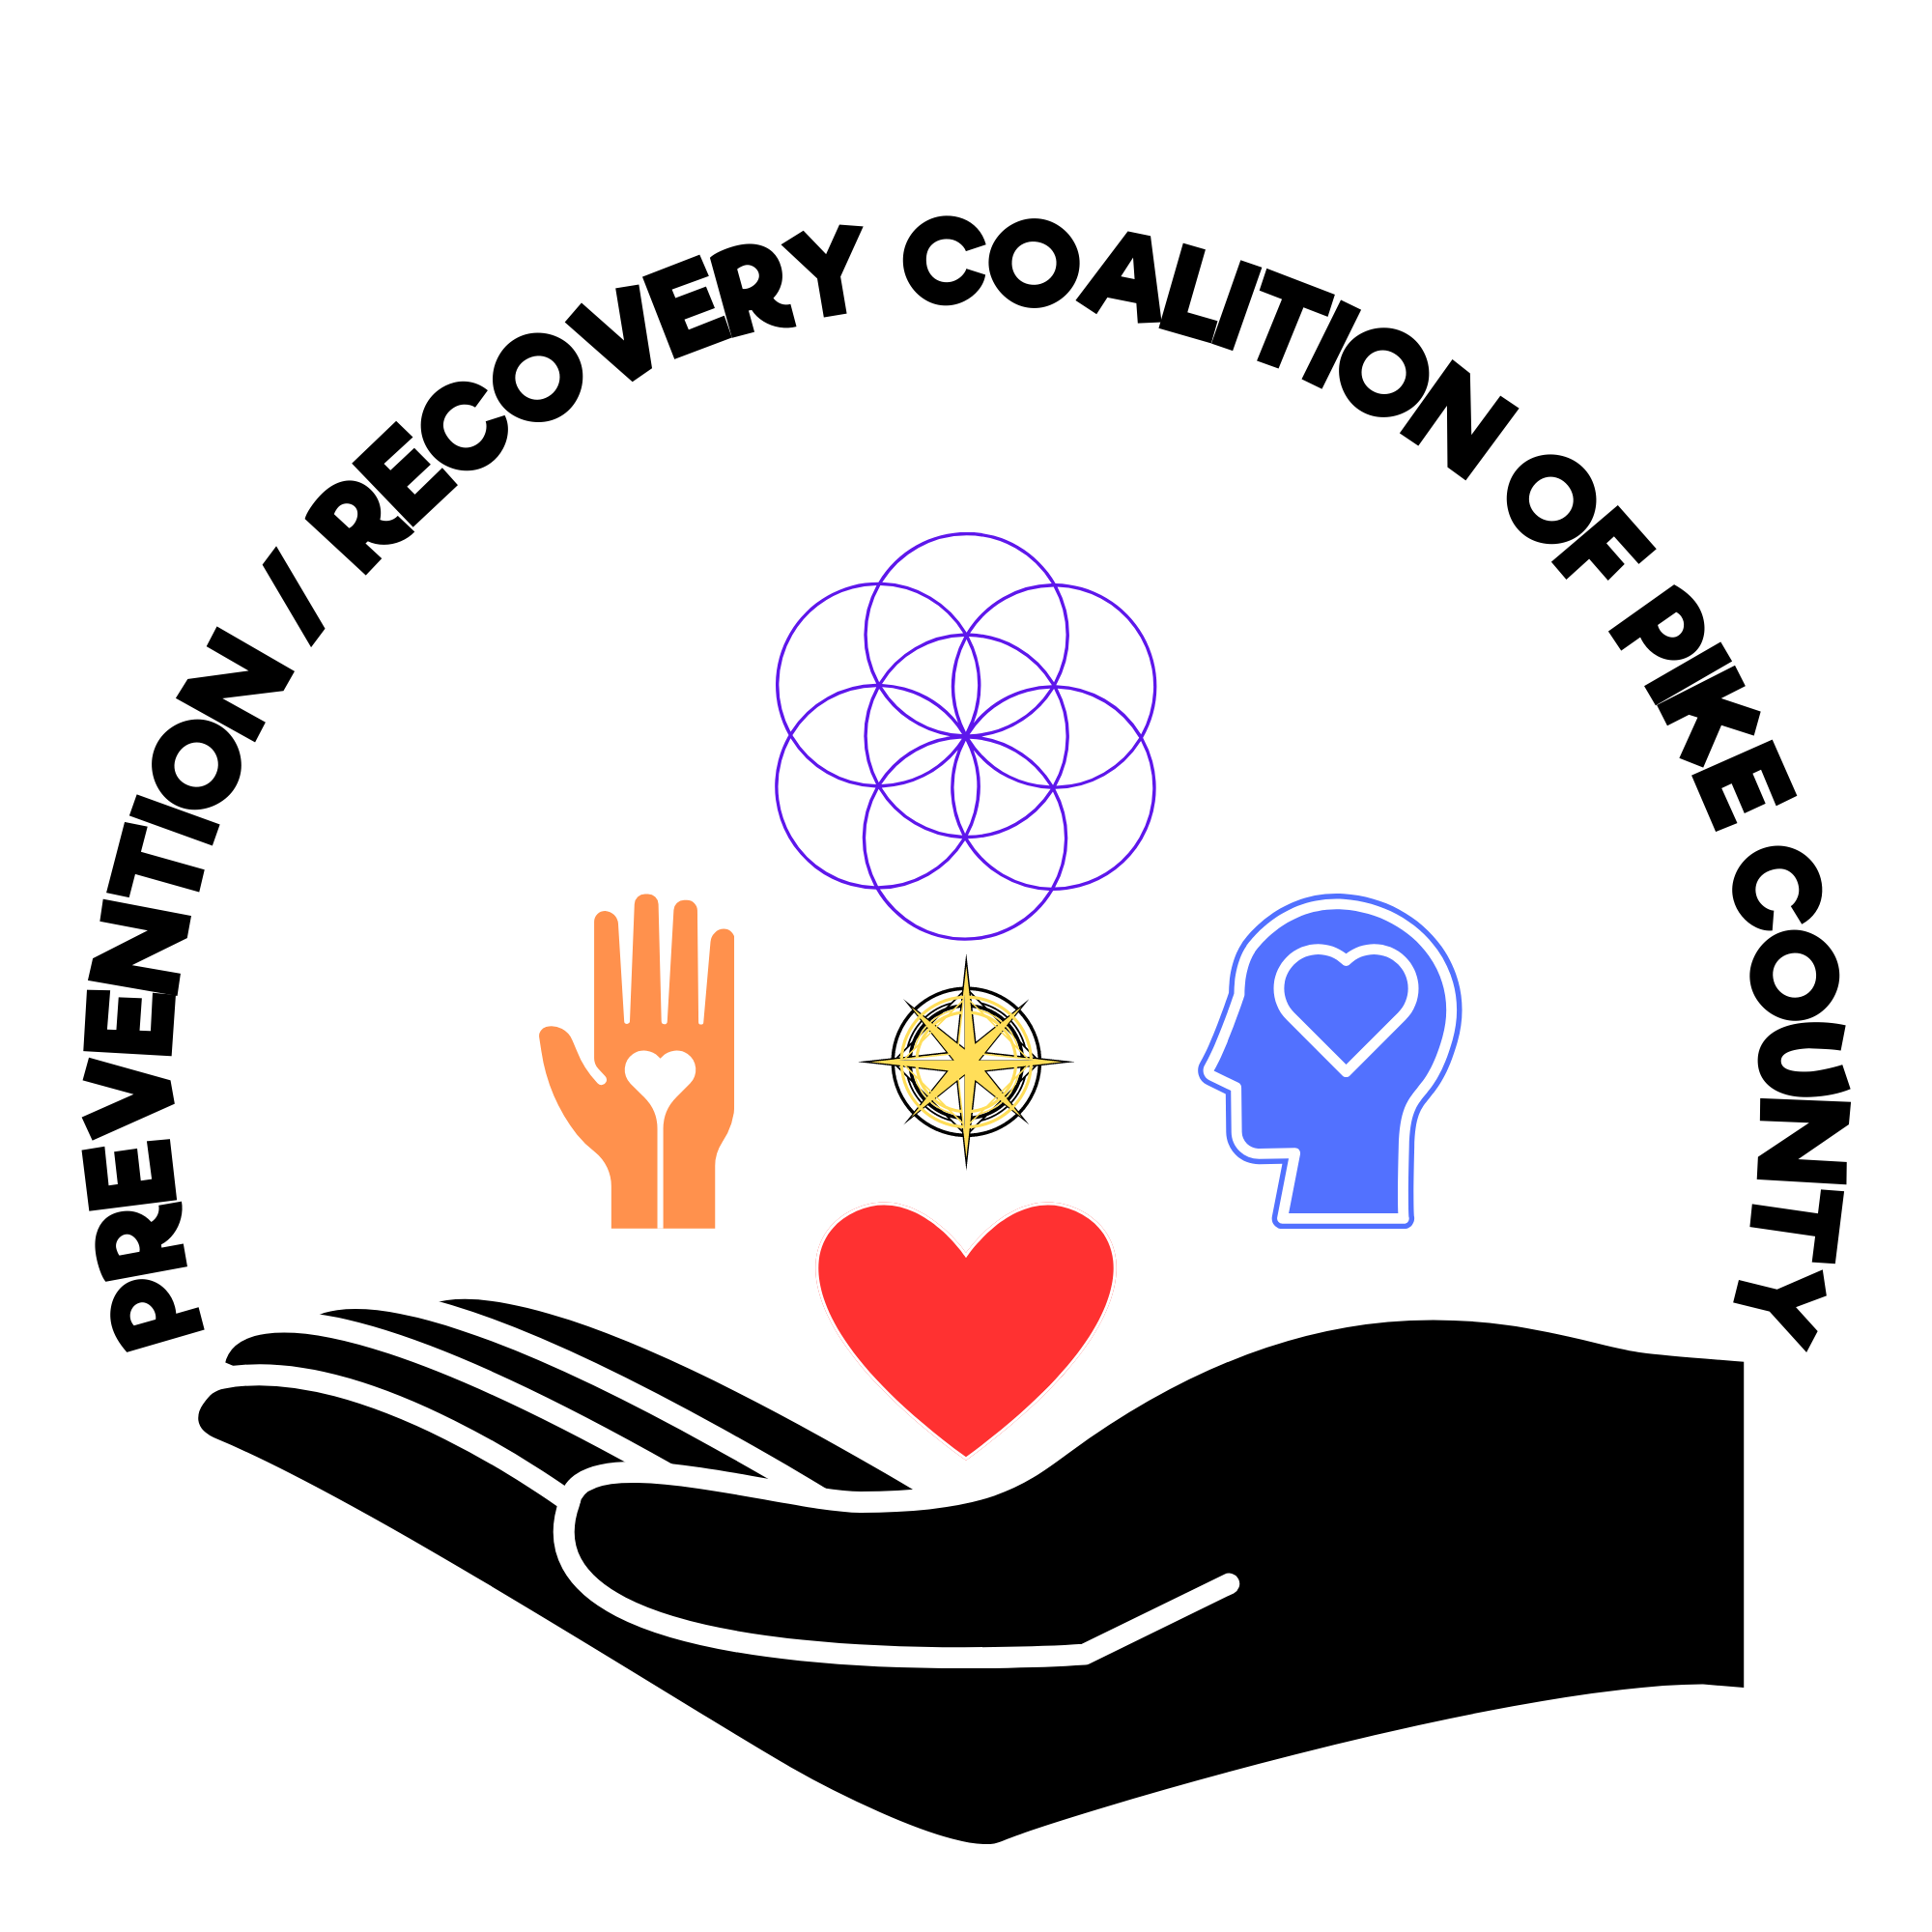 Prevention / Recovery Coalition of Pike County